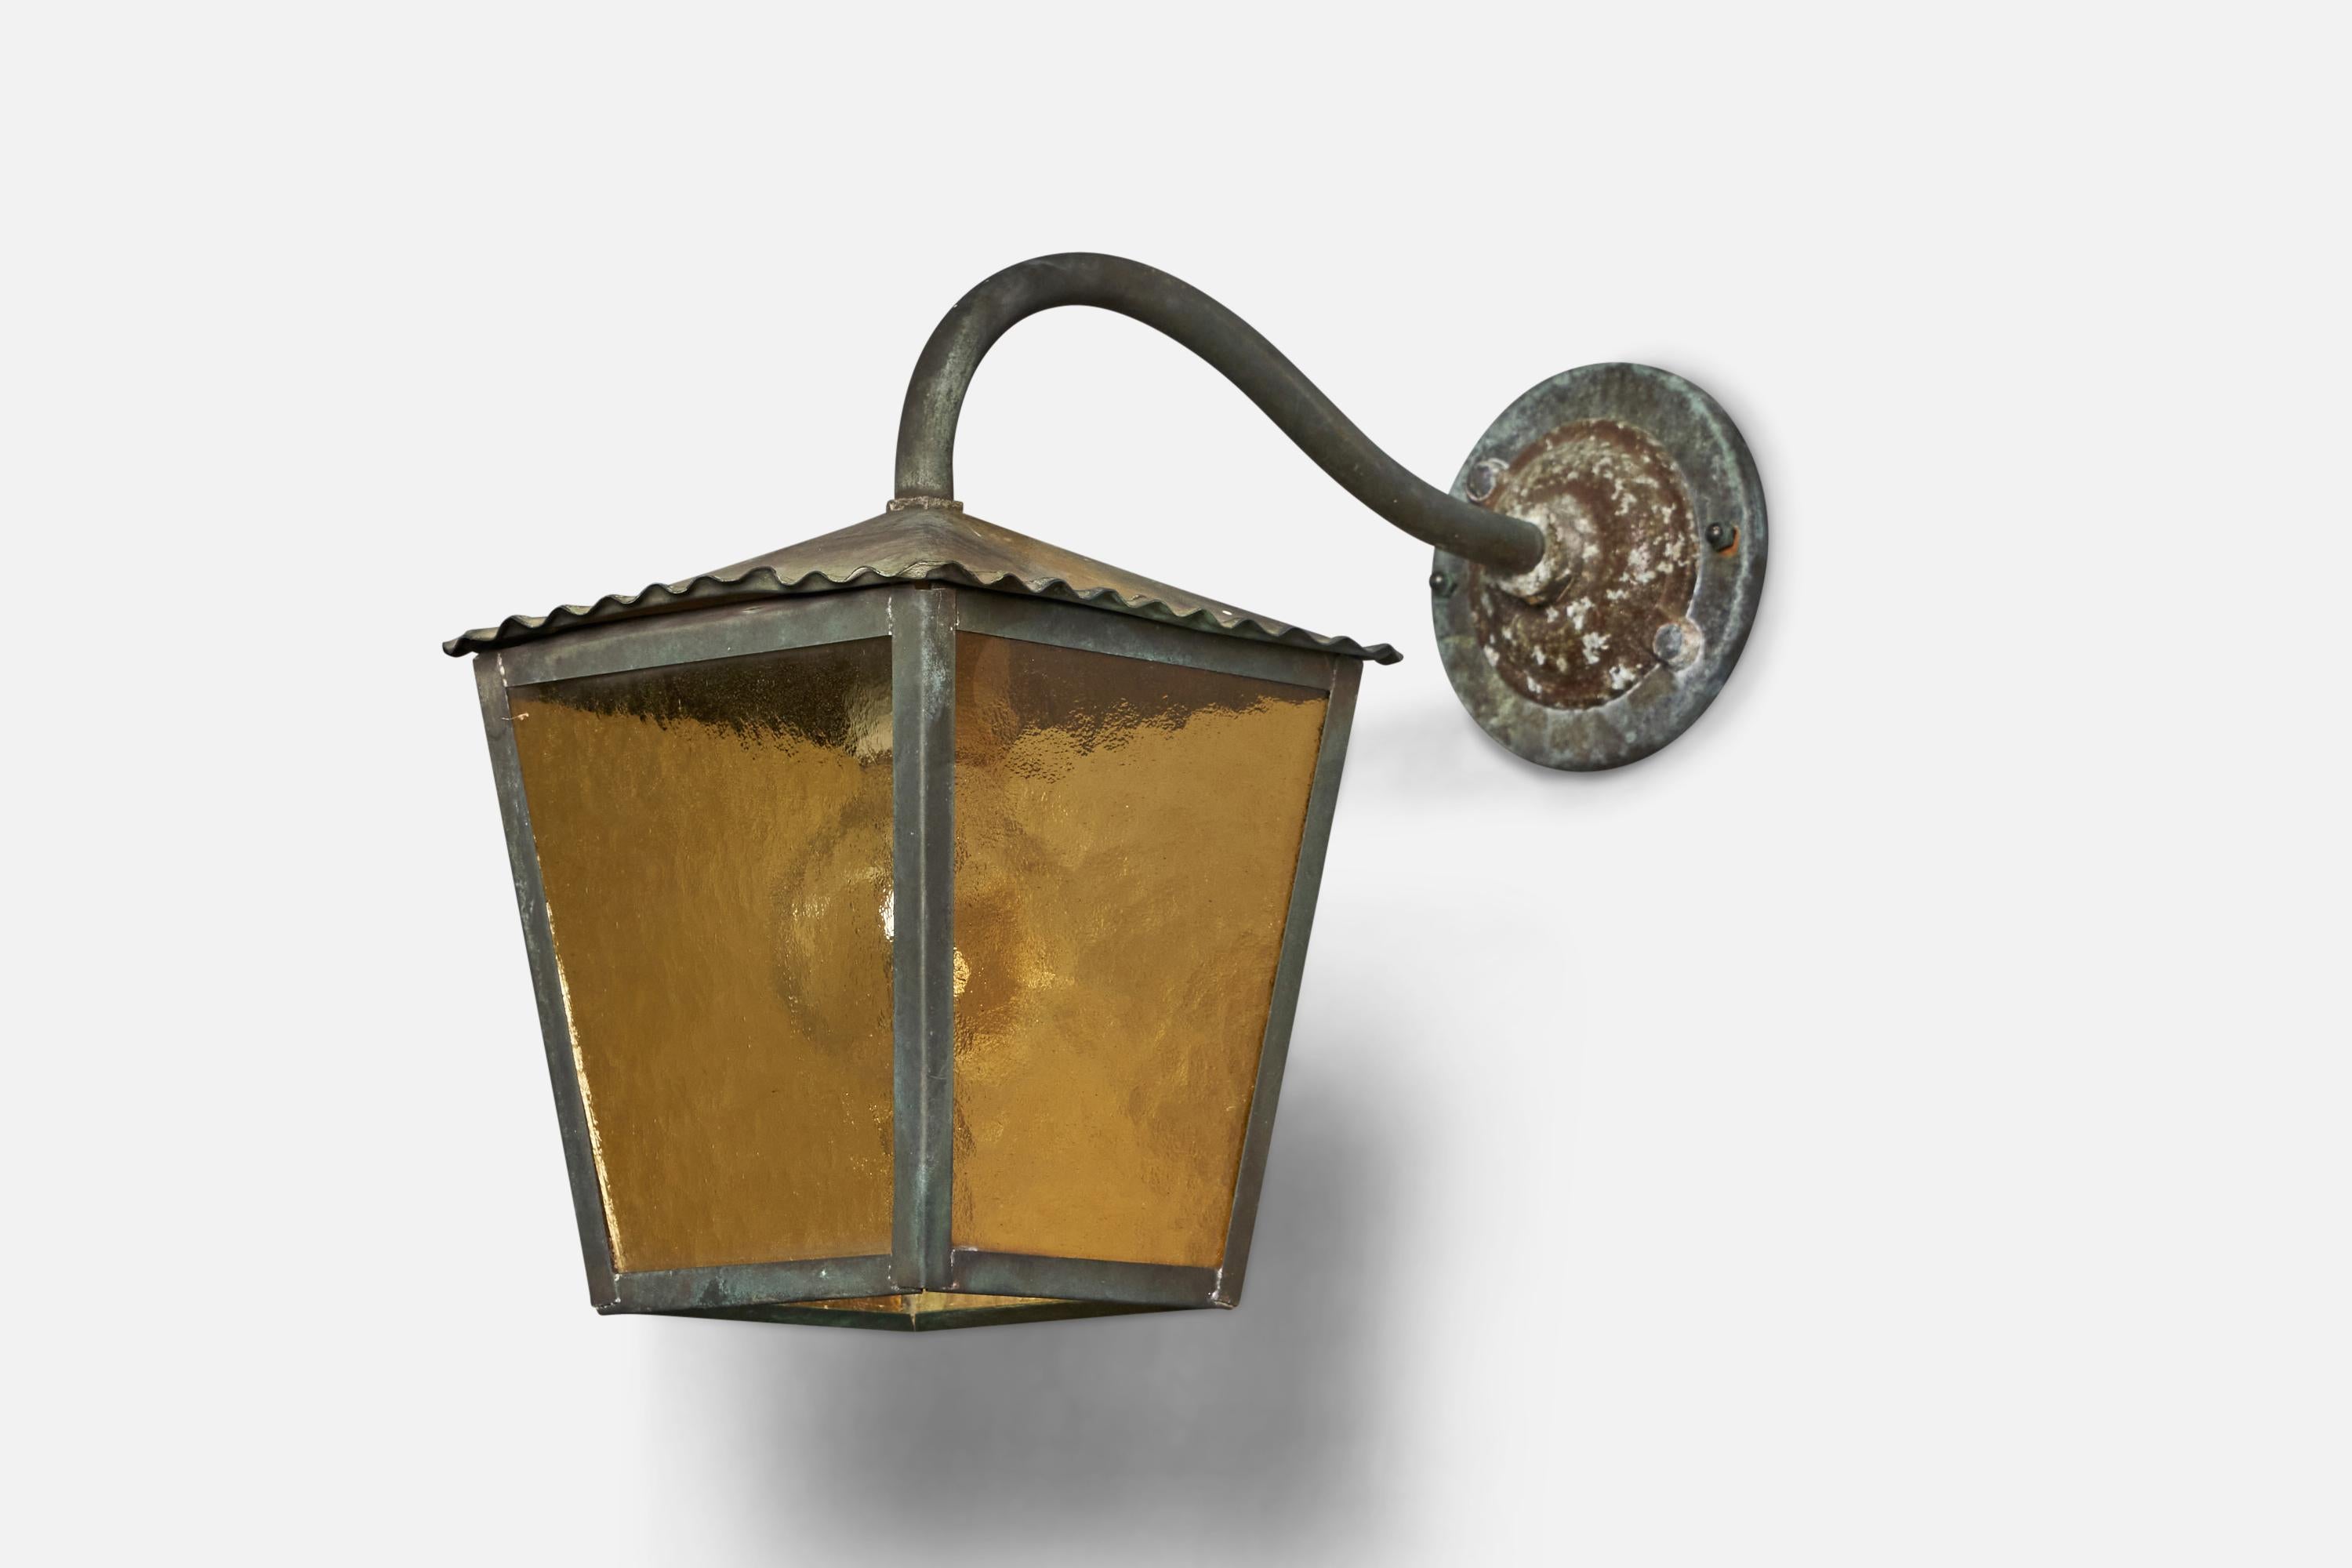 A patinated copper and yellow-coloured glass wall light designed and produced in Sweden, 1940s.

Overall Dimensions (inches): 11.5” H x 7.5” W x 15.15” D
Back Plate Dimensions (inches): 4.8” Diameter
Bulb Specifications: E-26 Bulb
Number of Sockets: